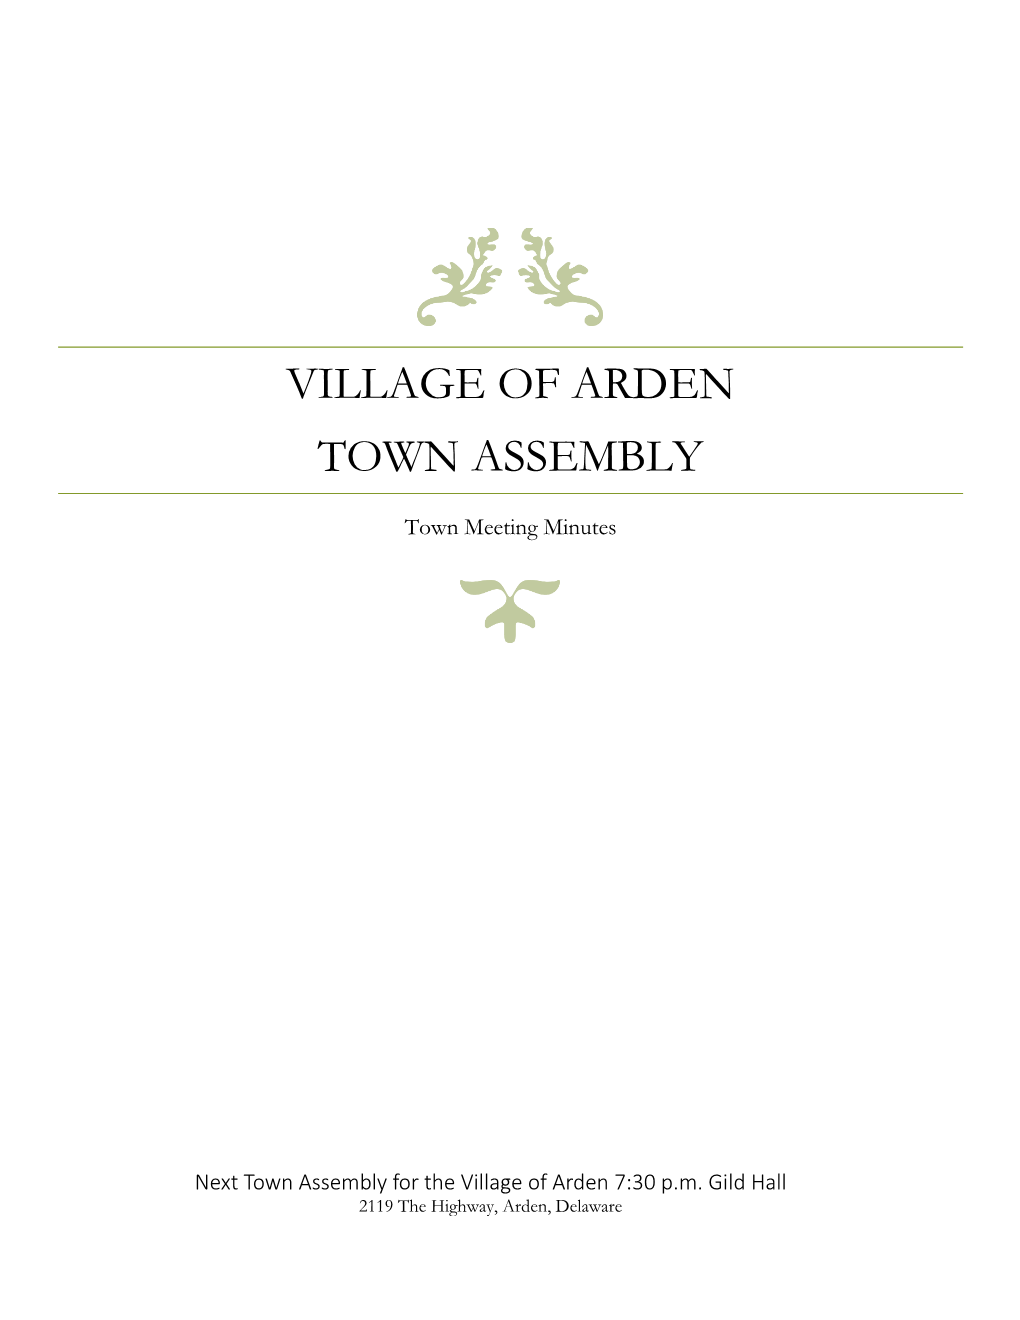 Village of Arden Town Assembly